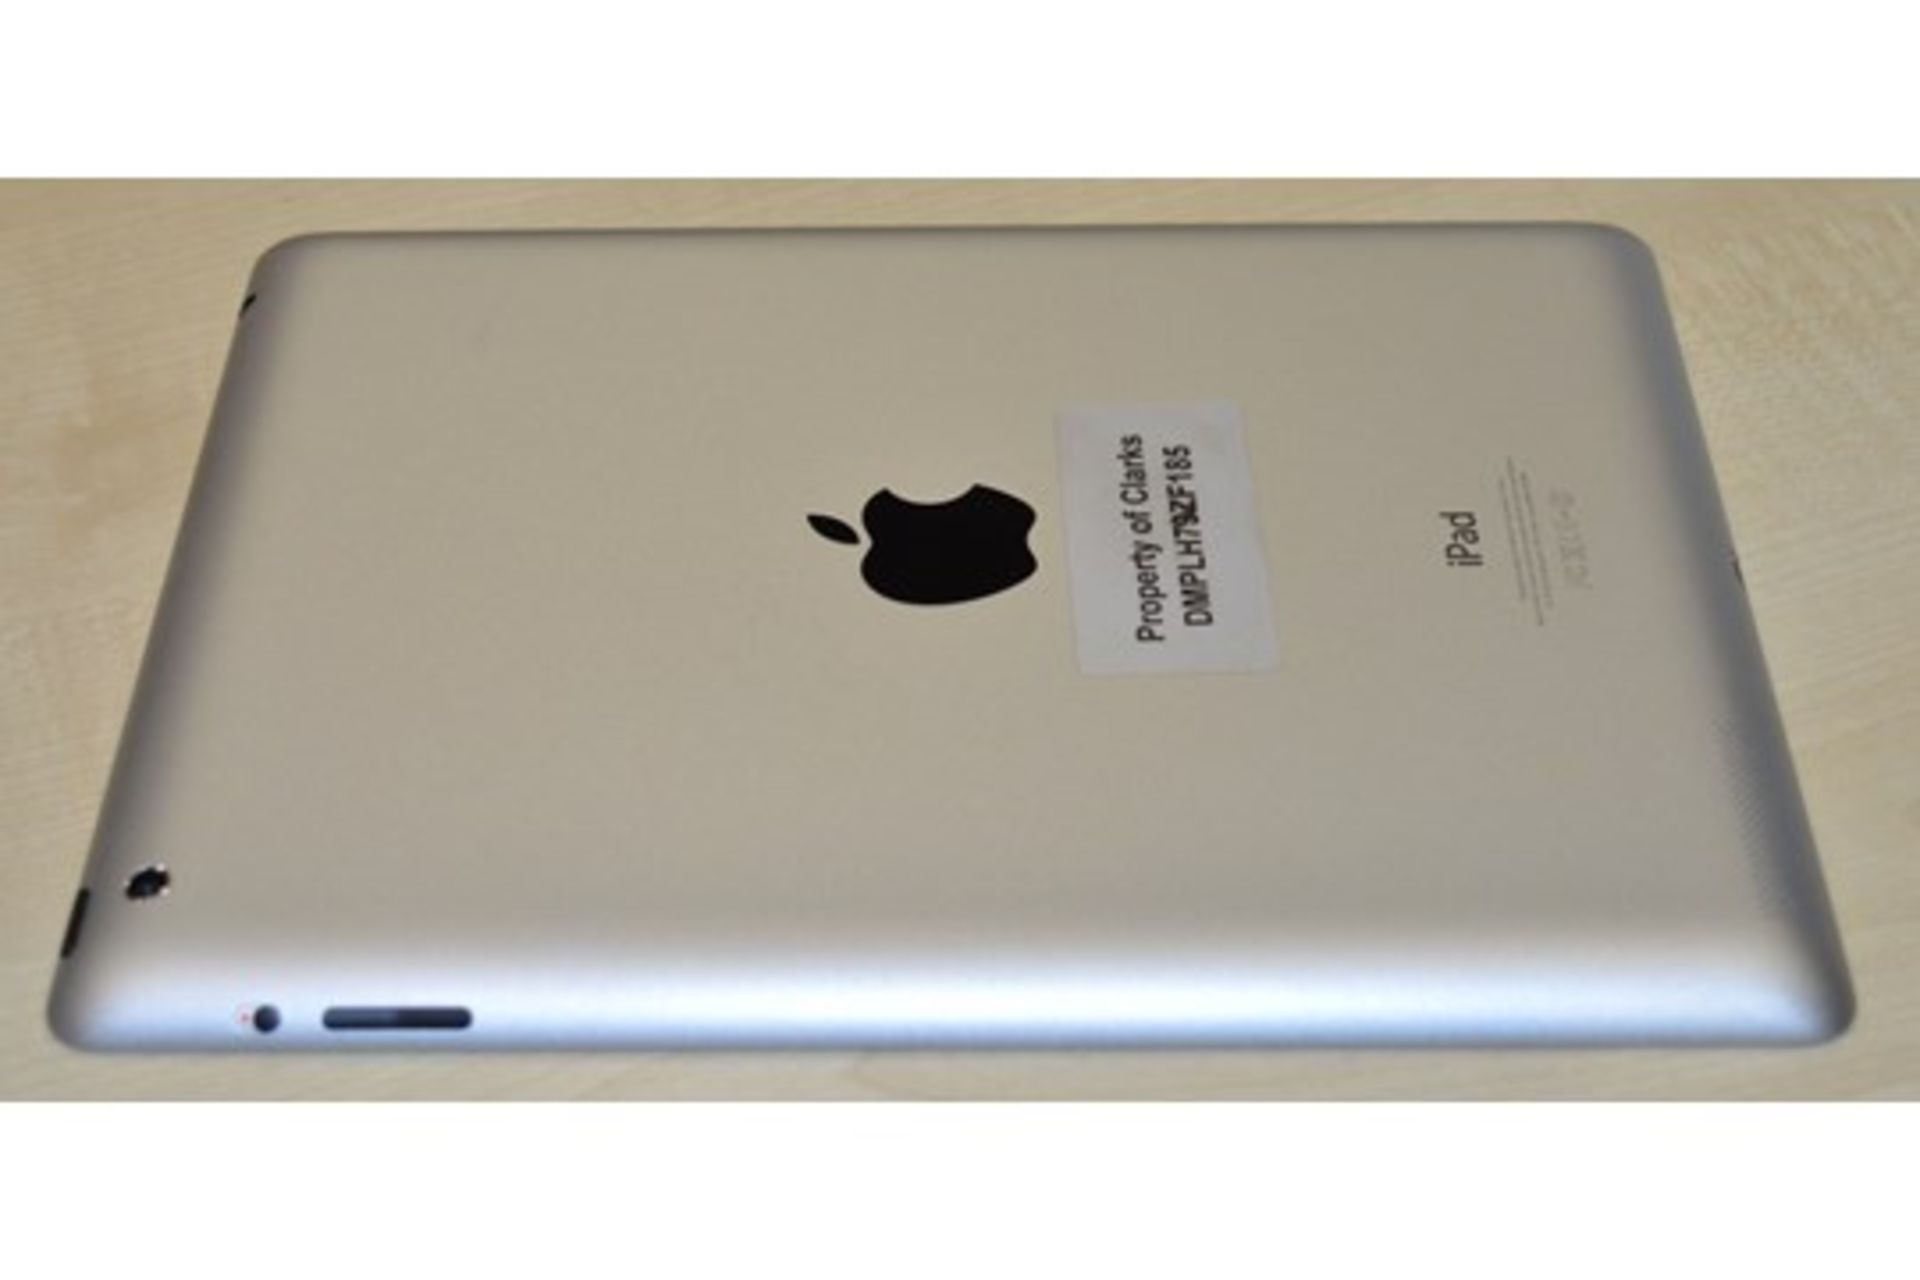 1 x Apple iPad 4th Generation in White - Model A1458 - 16gb Storage - Large 9.7 Inch Screen - - Image 5 of 5